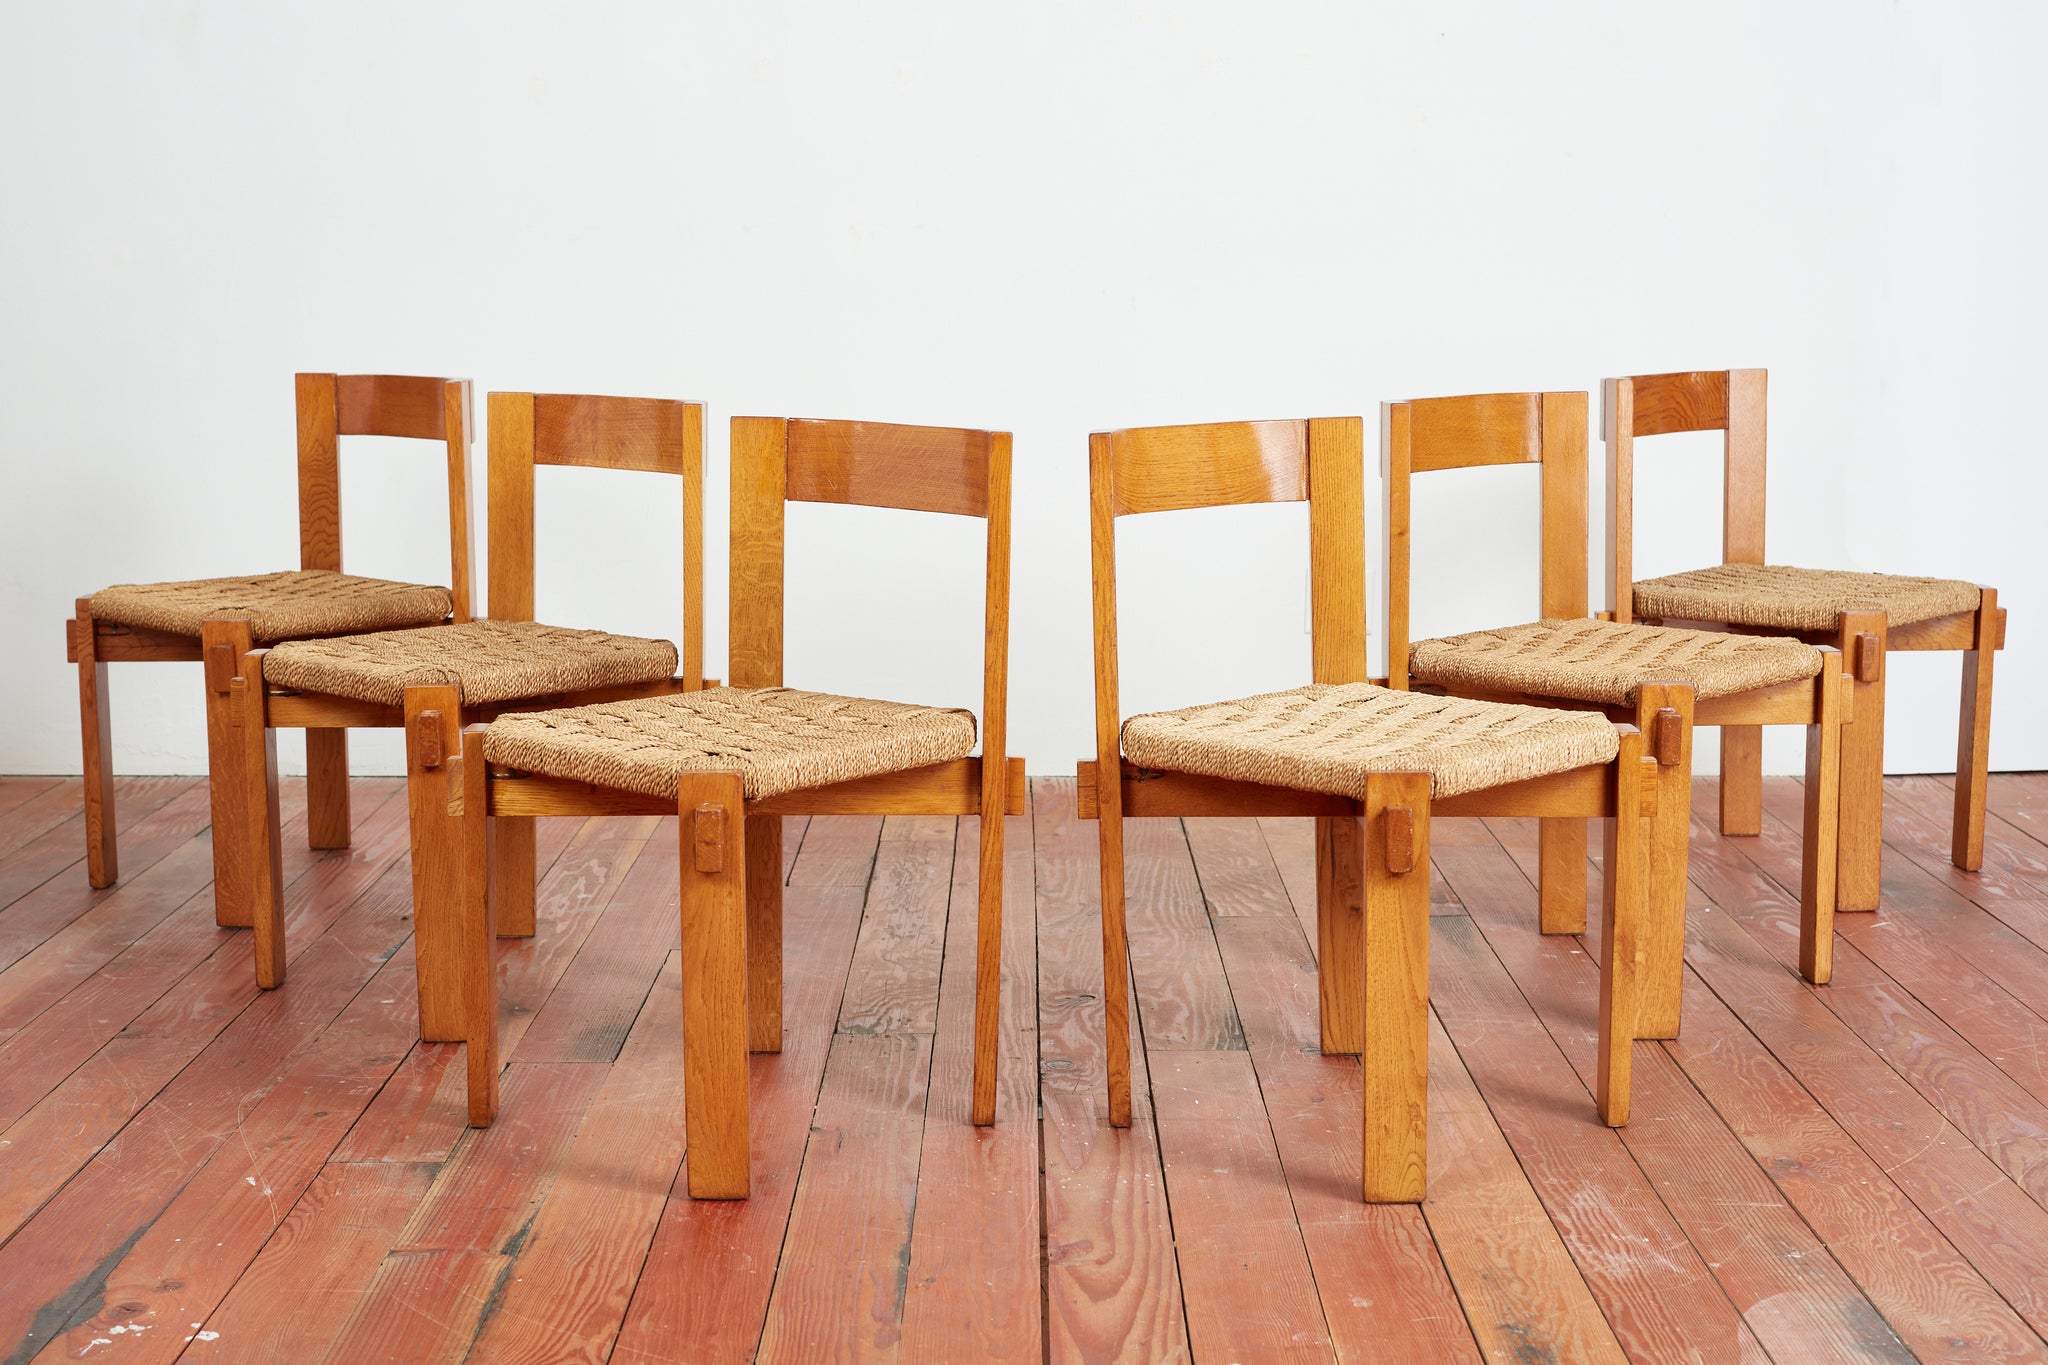 Charlotte Perriand Style Dining Chairs - Orange Furniture Los Angeles